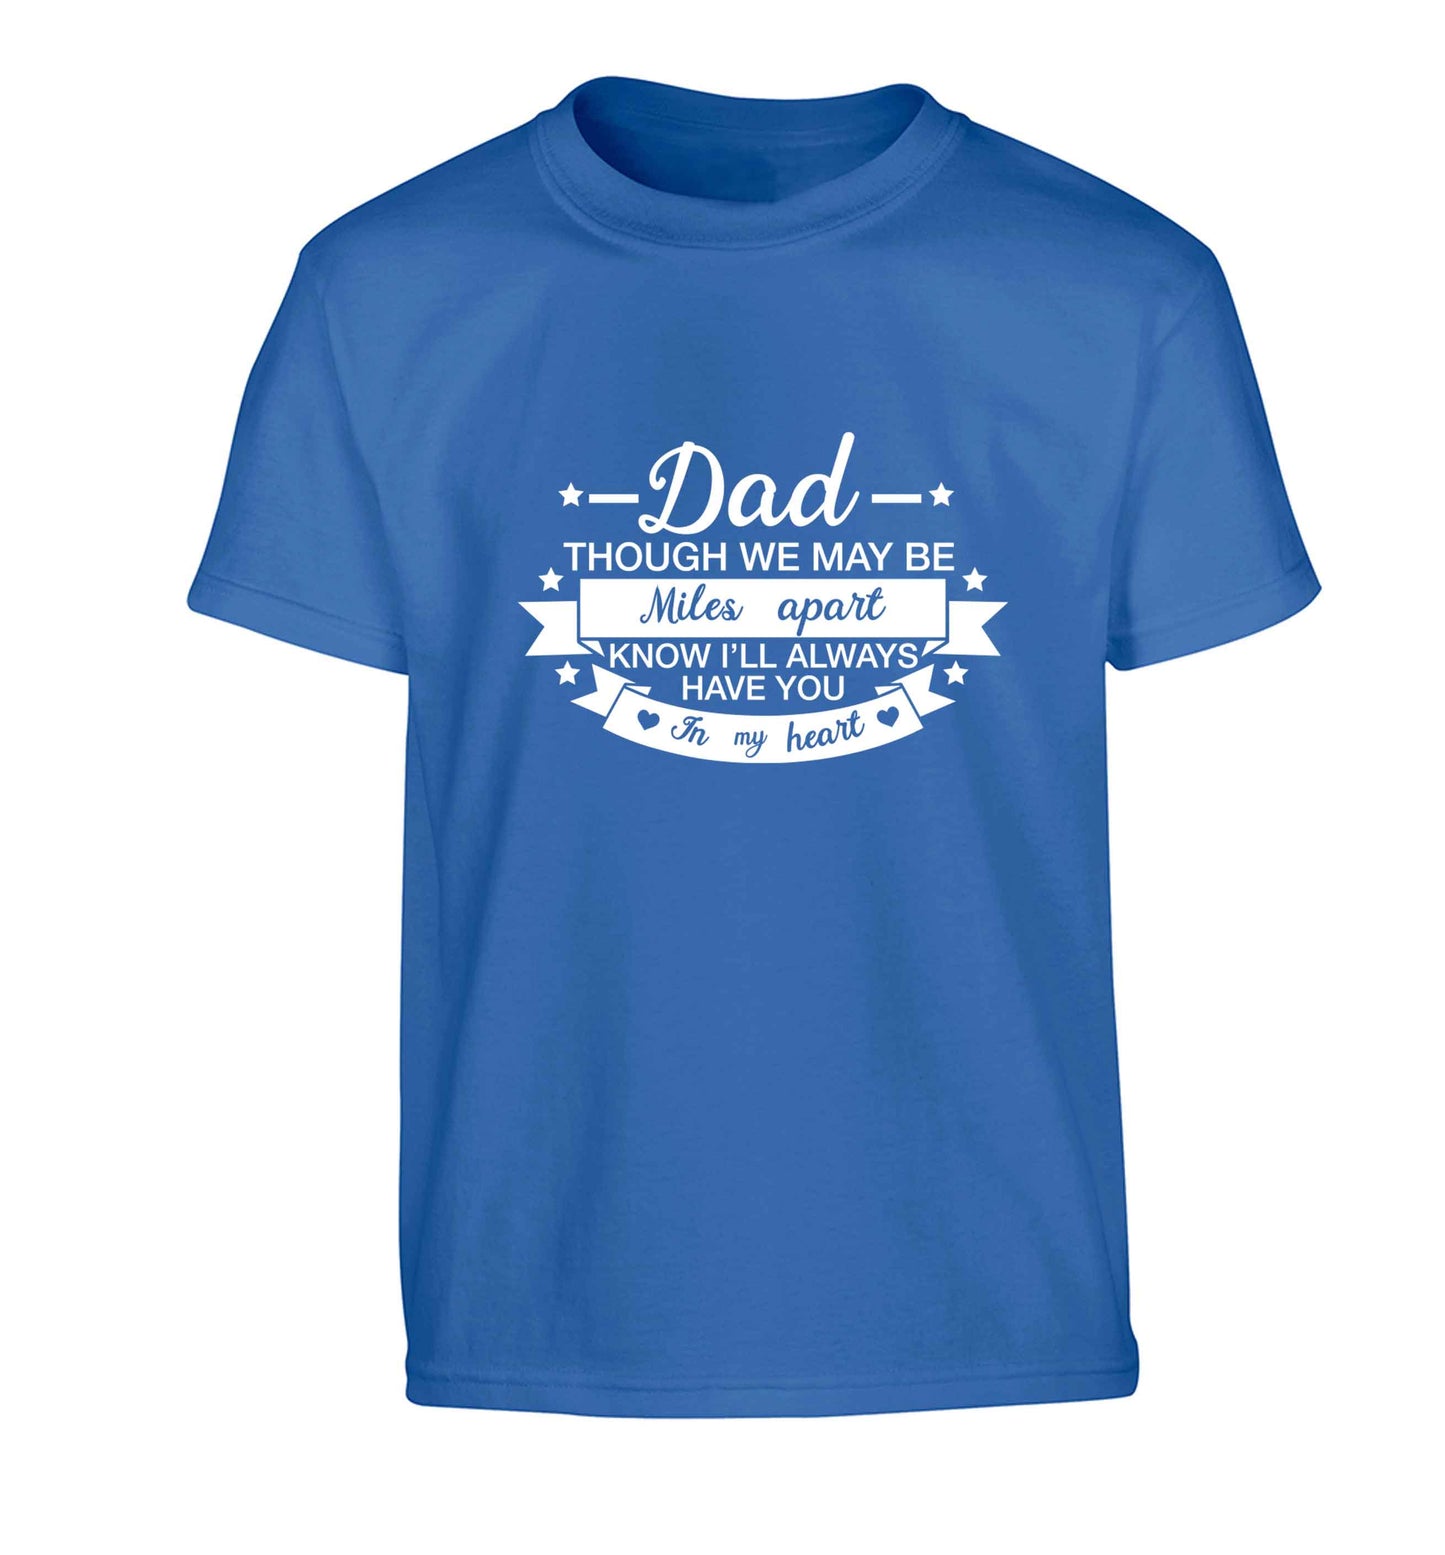 Dad though we are miles apart know I'll always have you in my heart Children's blue Tshirt 12-13 Years